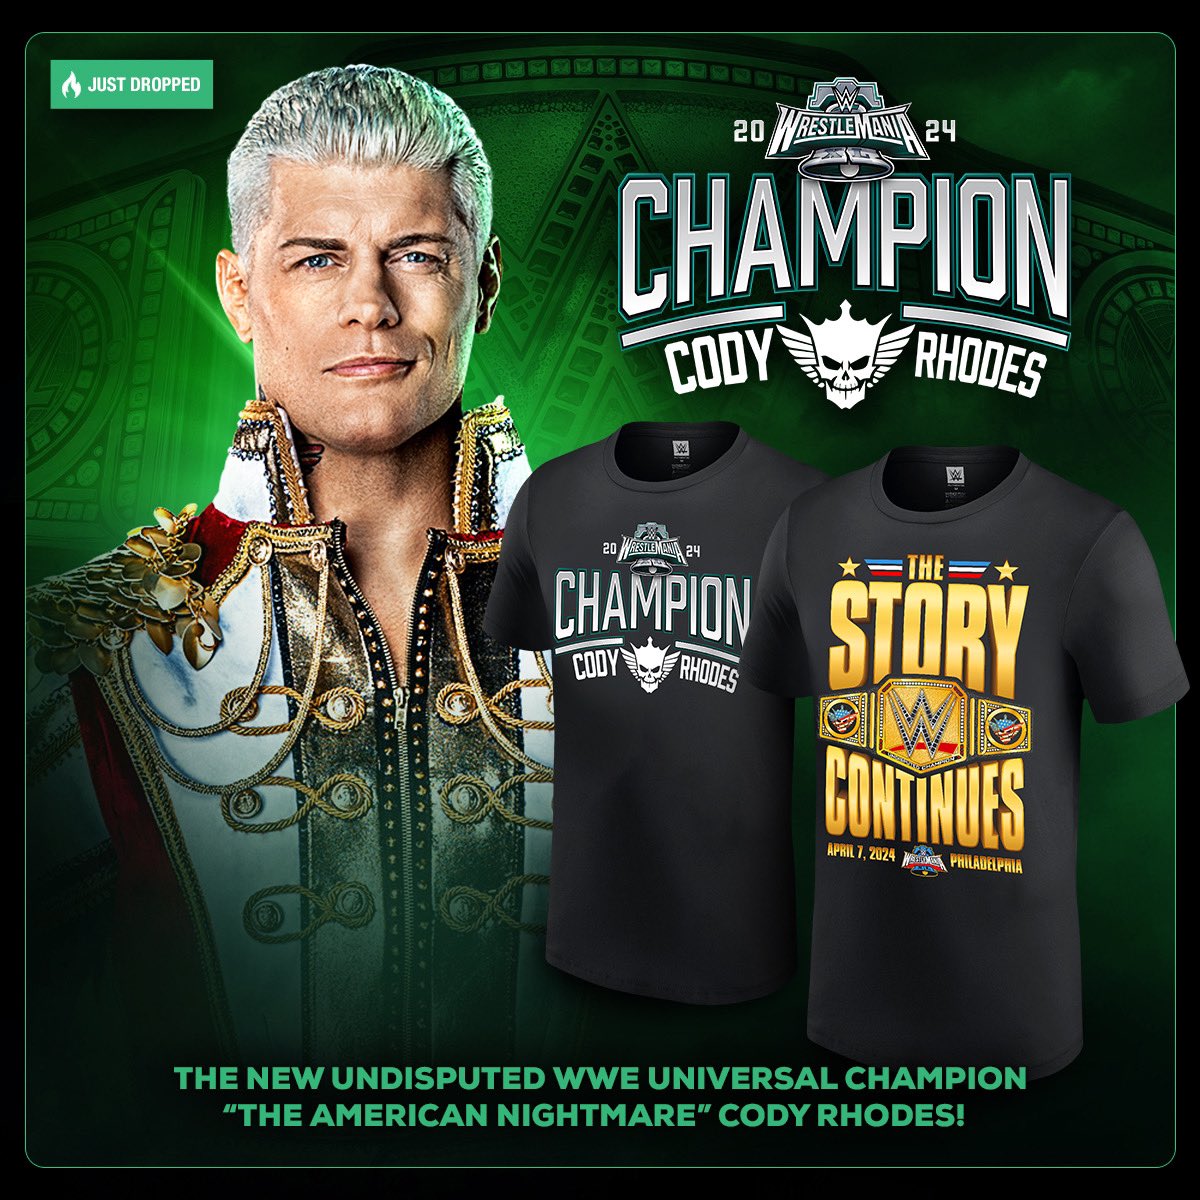 THE STORY CONTINUES! 'The American Nightmare' Cody Rhodes is now your NEW Undisputed WWE Universal Champion! Commemorate his historic victory with this Champion Collection at #WWEShop! #WWE #WrestleMania 🛒: bit.ly/49s1mKz